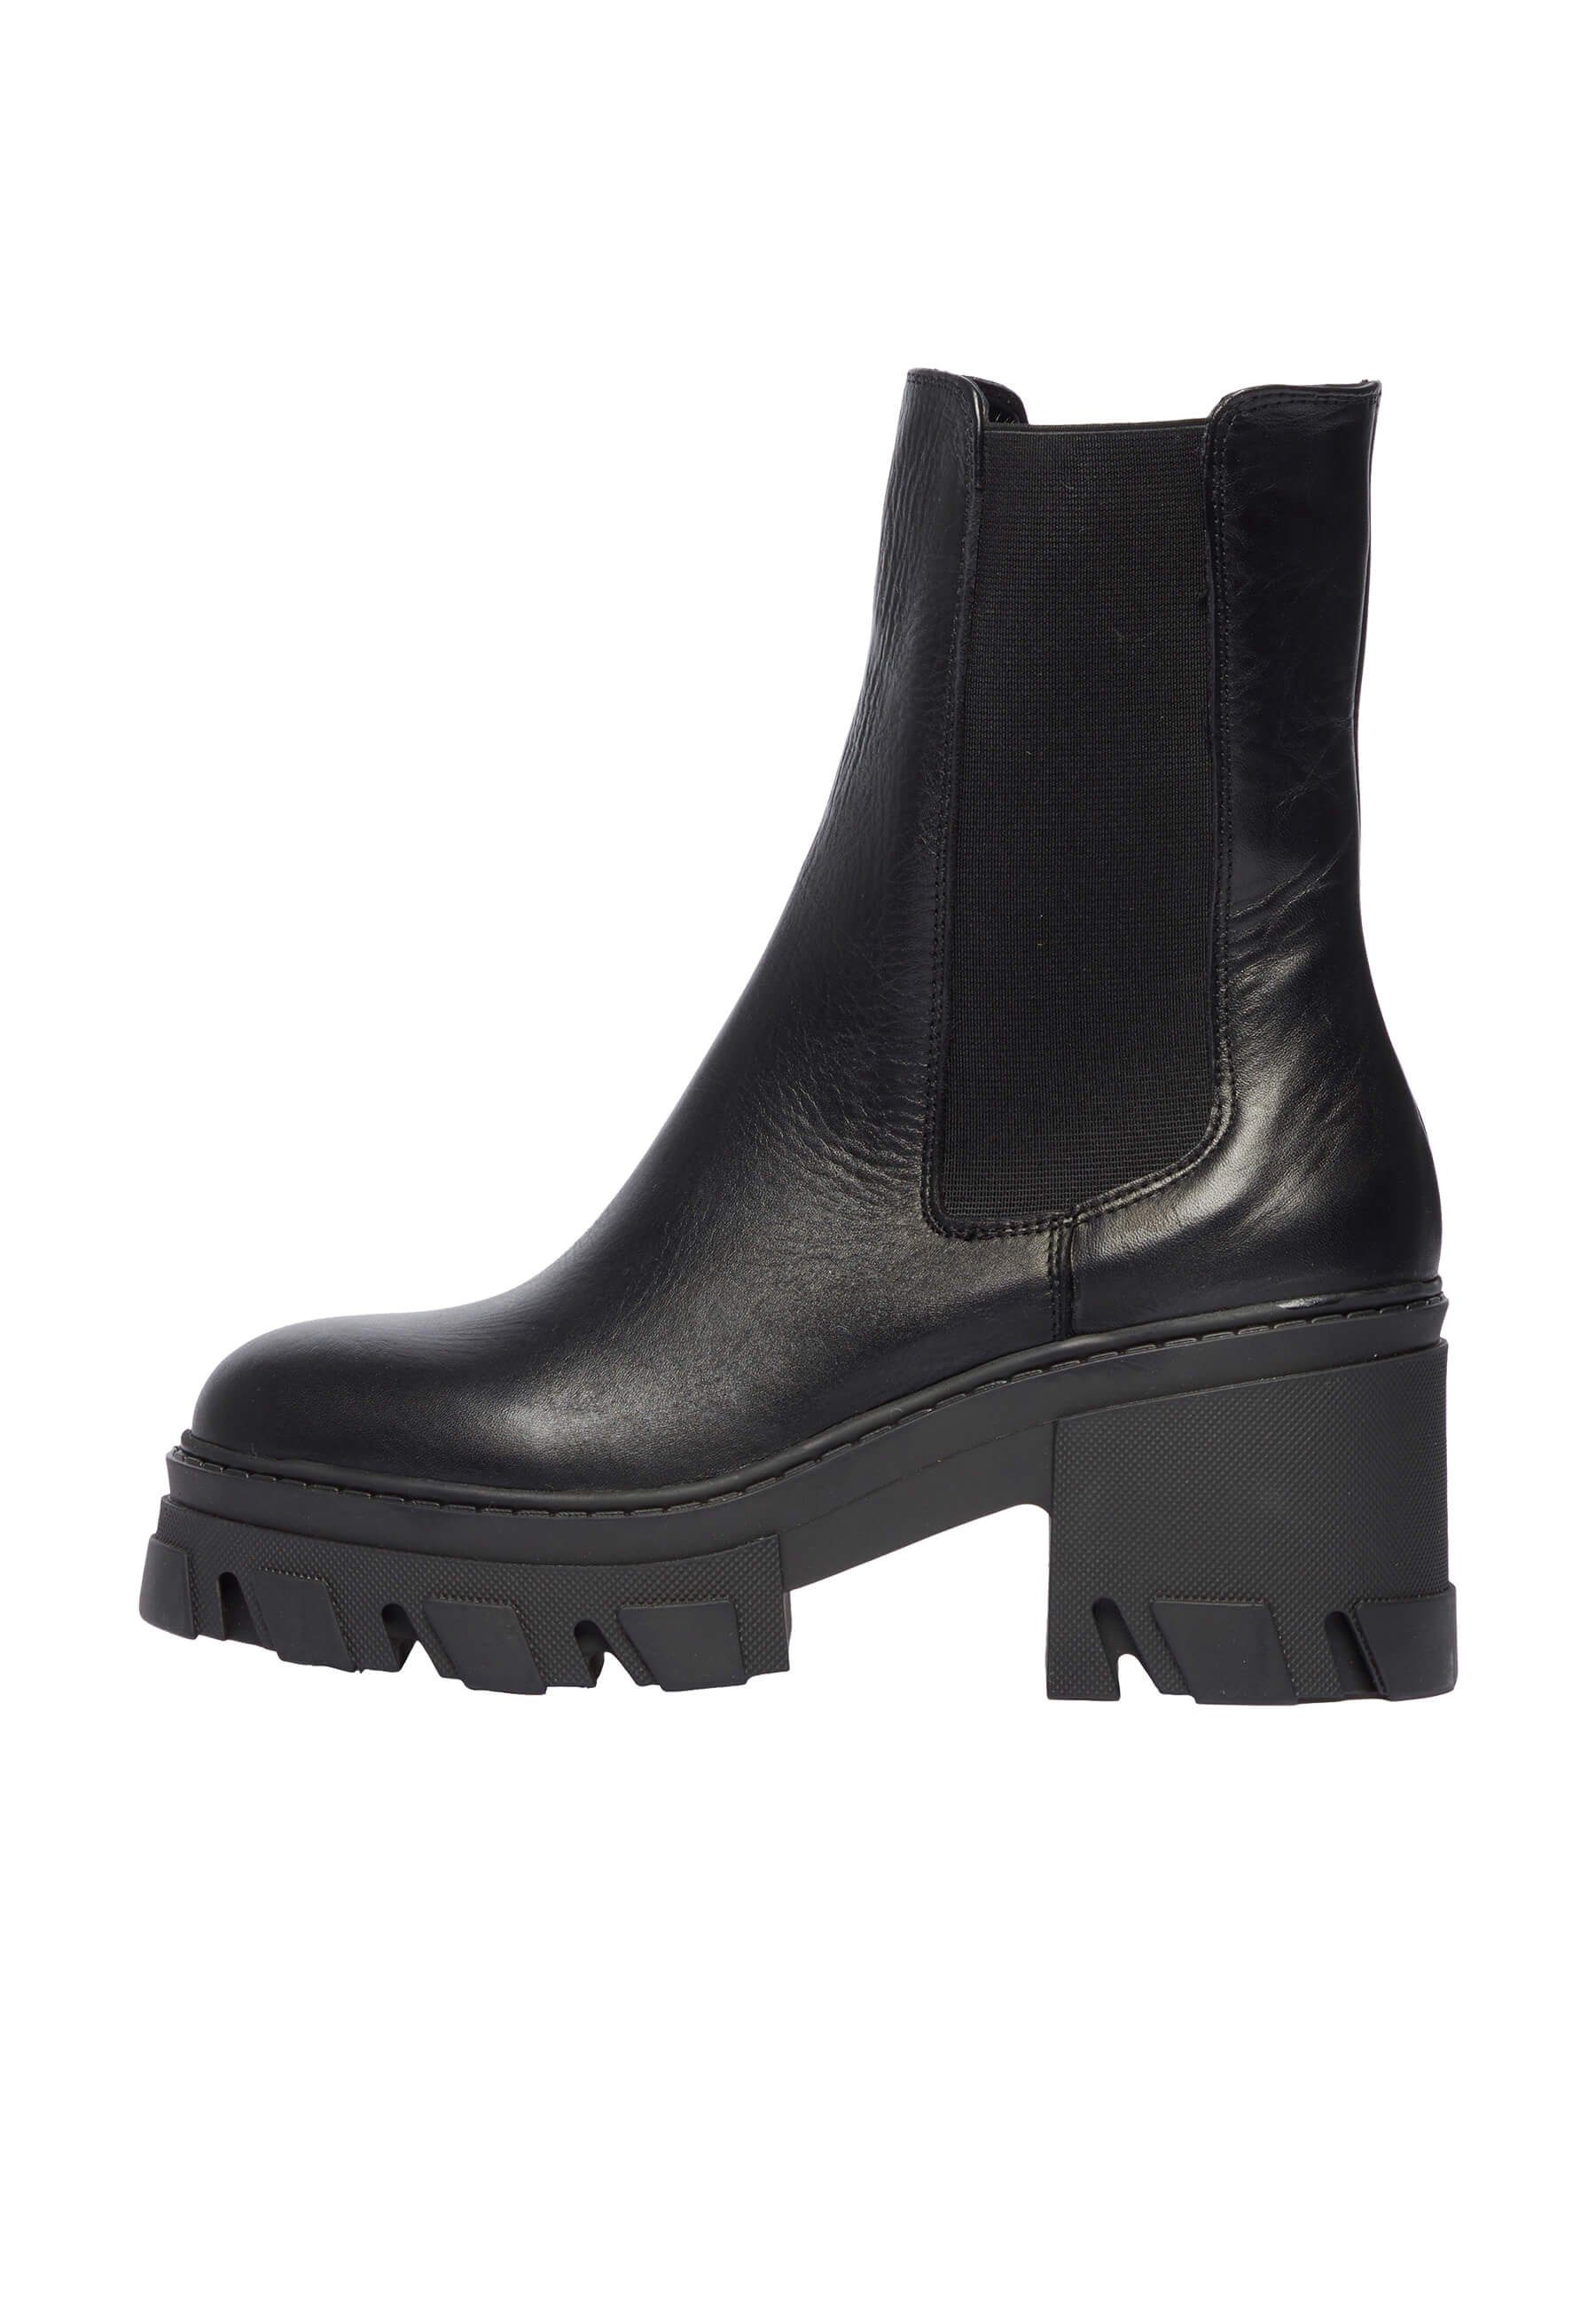 Di' nuovo Chelsea Boots Mit Grober Plateausohle Chelseaboots mit modernem Design